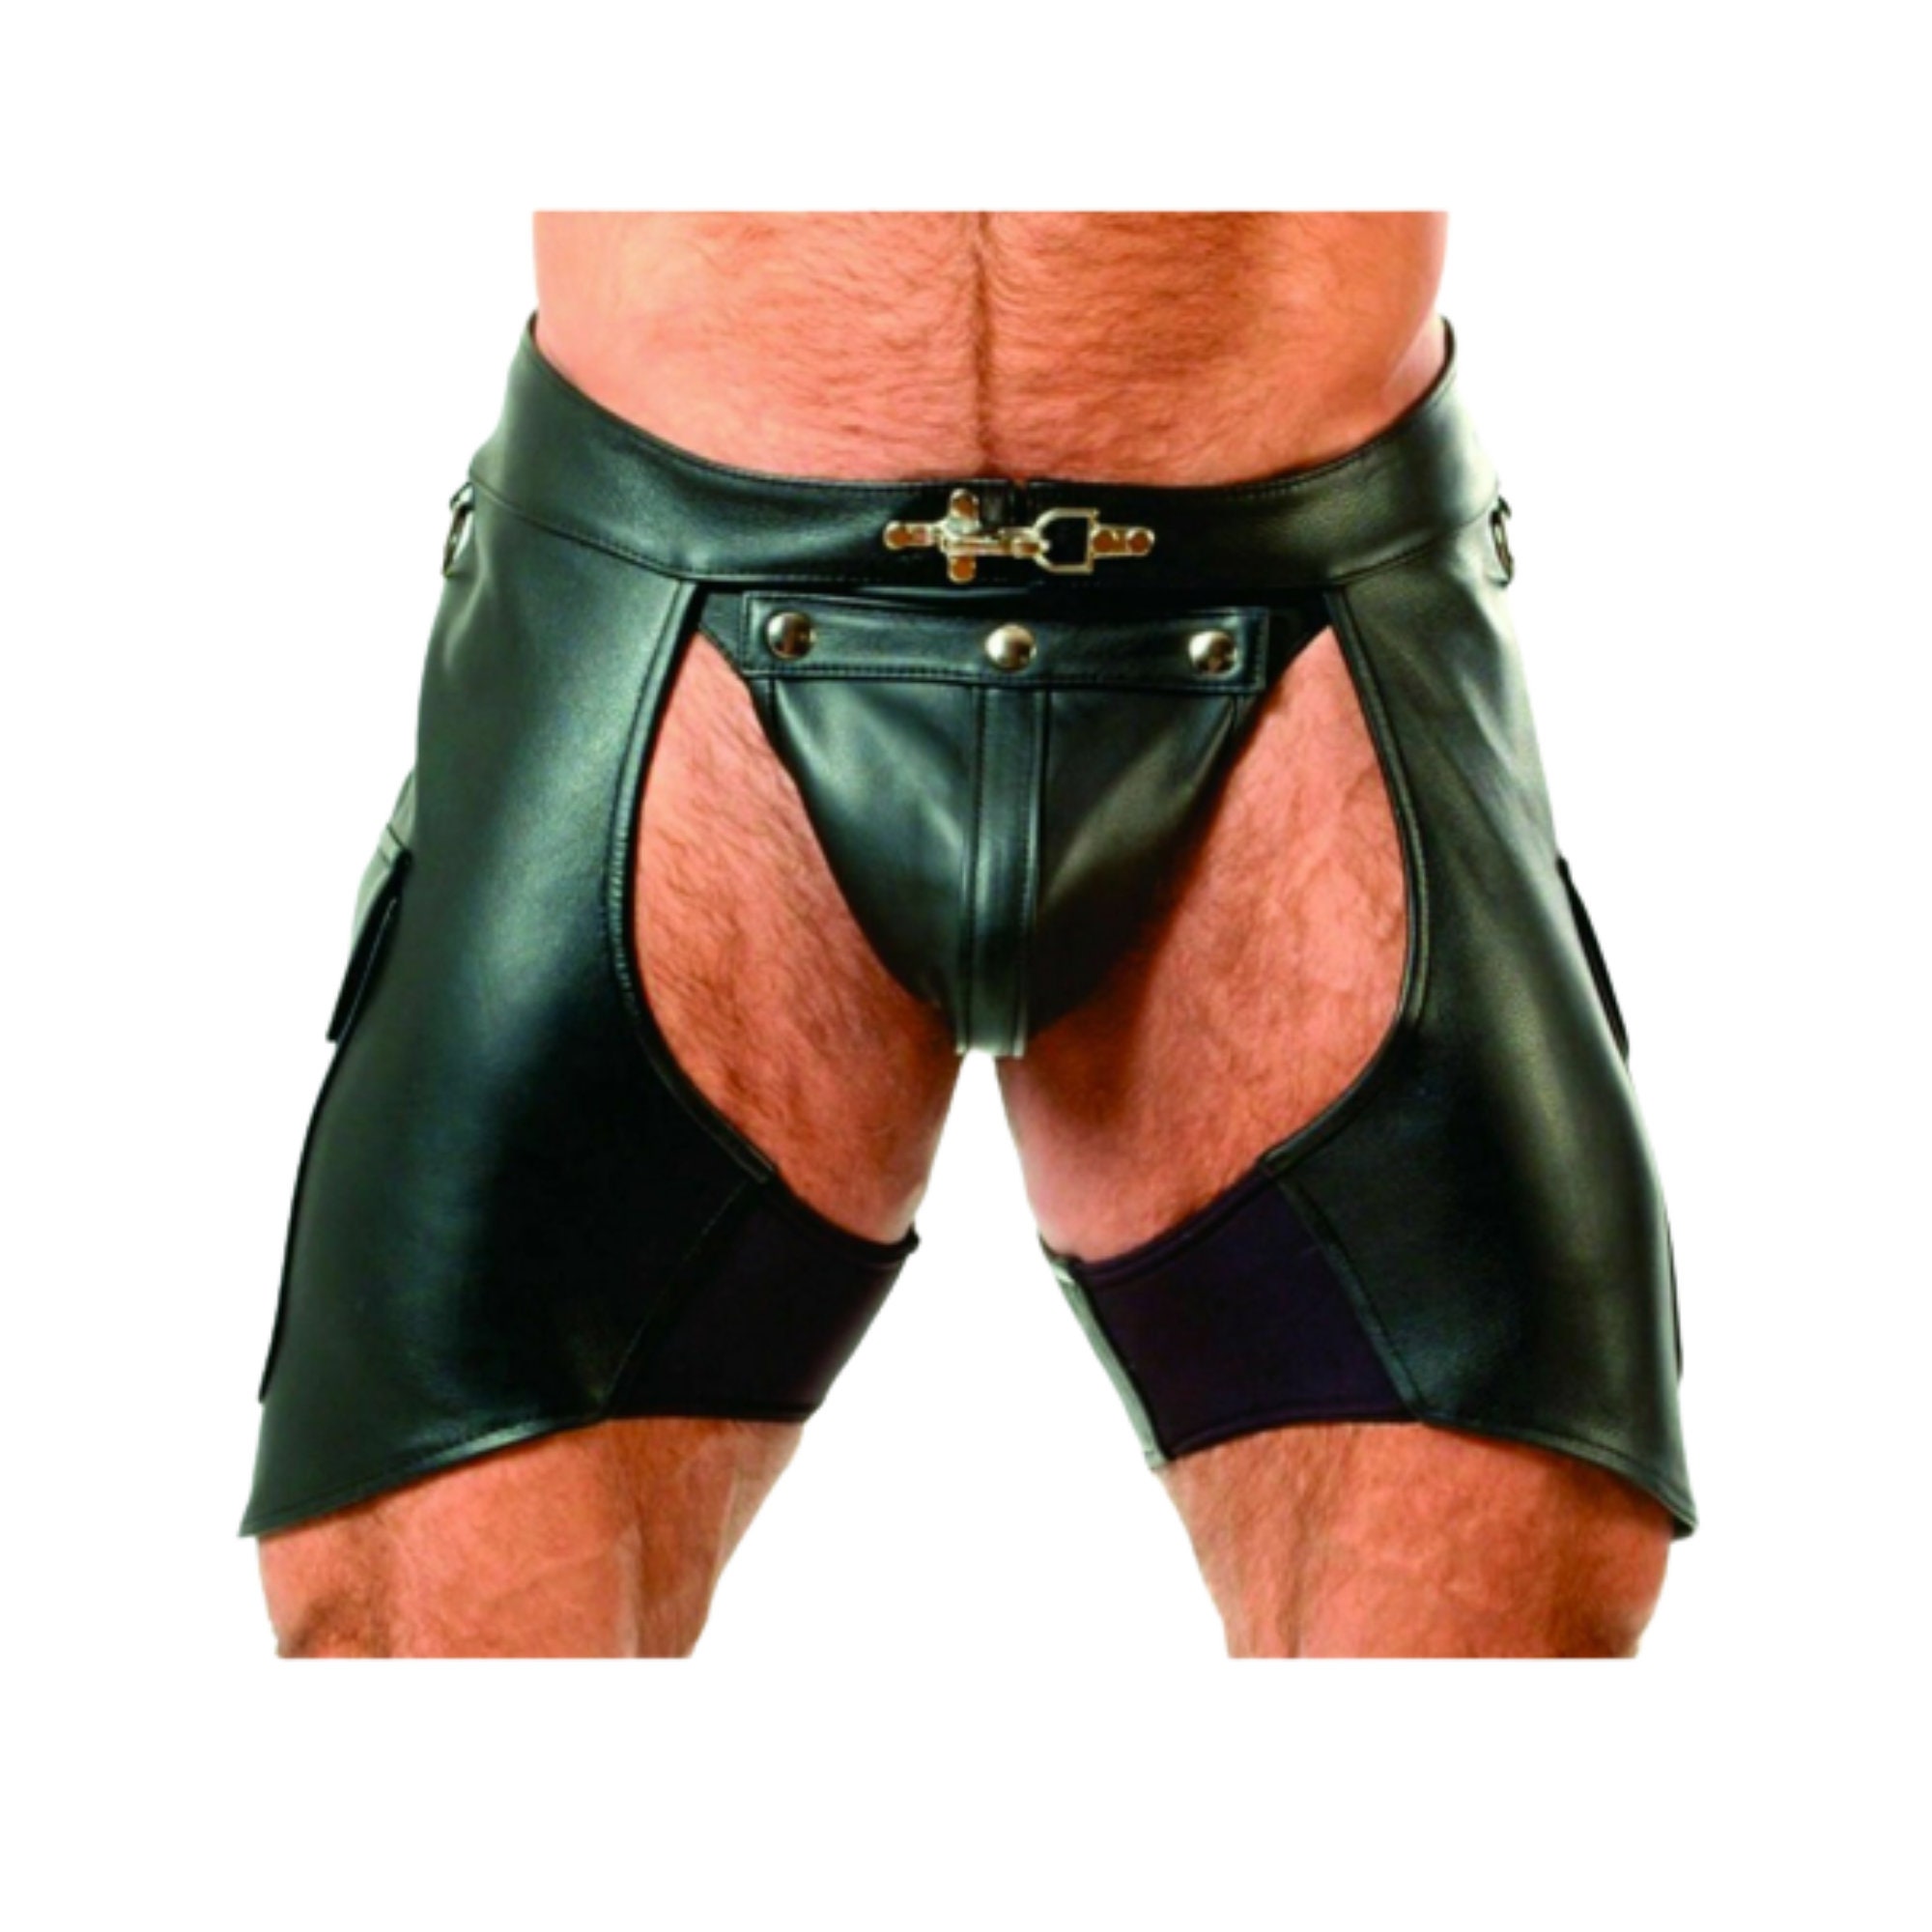 Clothing Gender-Neutral Adult Clothing Shorts Leather Chaps Chaps Exclusive Premium Men 100% Genuine Cow Leather Chaps Rider Shorts In Black Color With Orange Piping- Assless chaps 